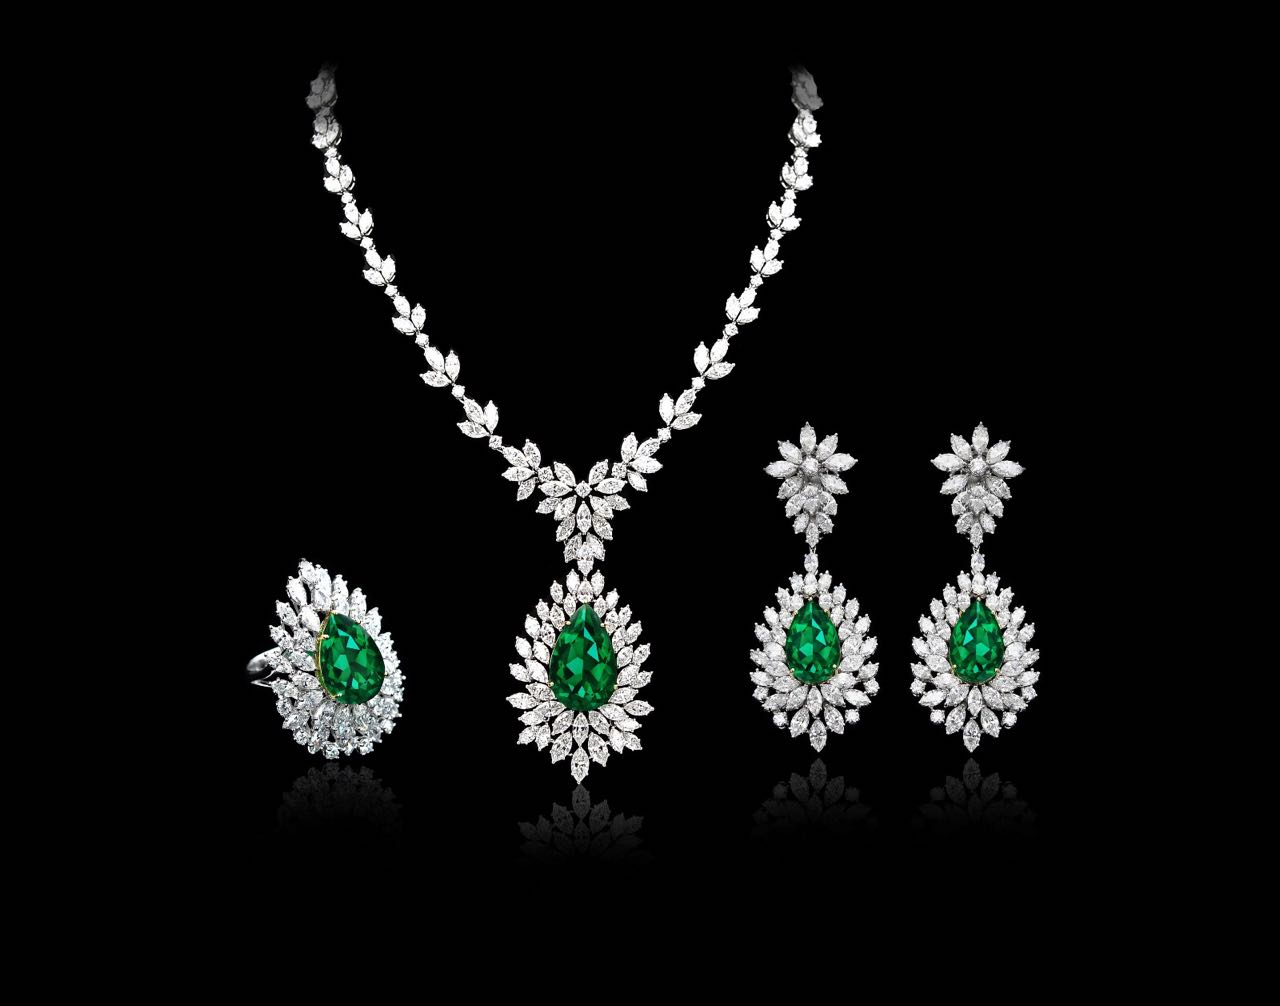 Diamond and emerald necklace, earrings and ring set